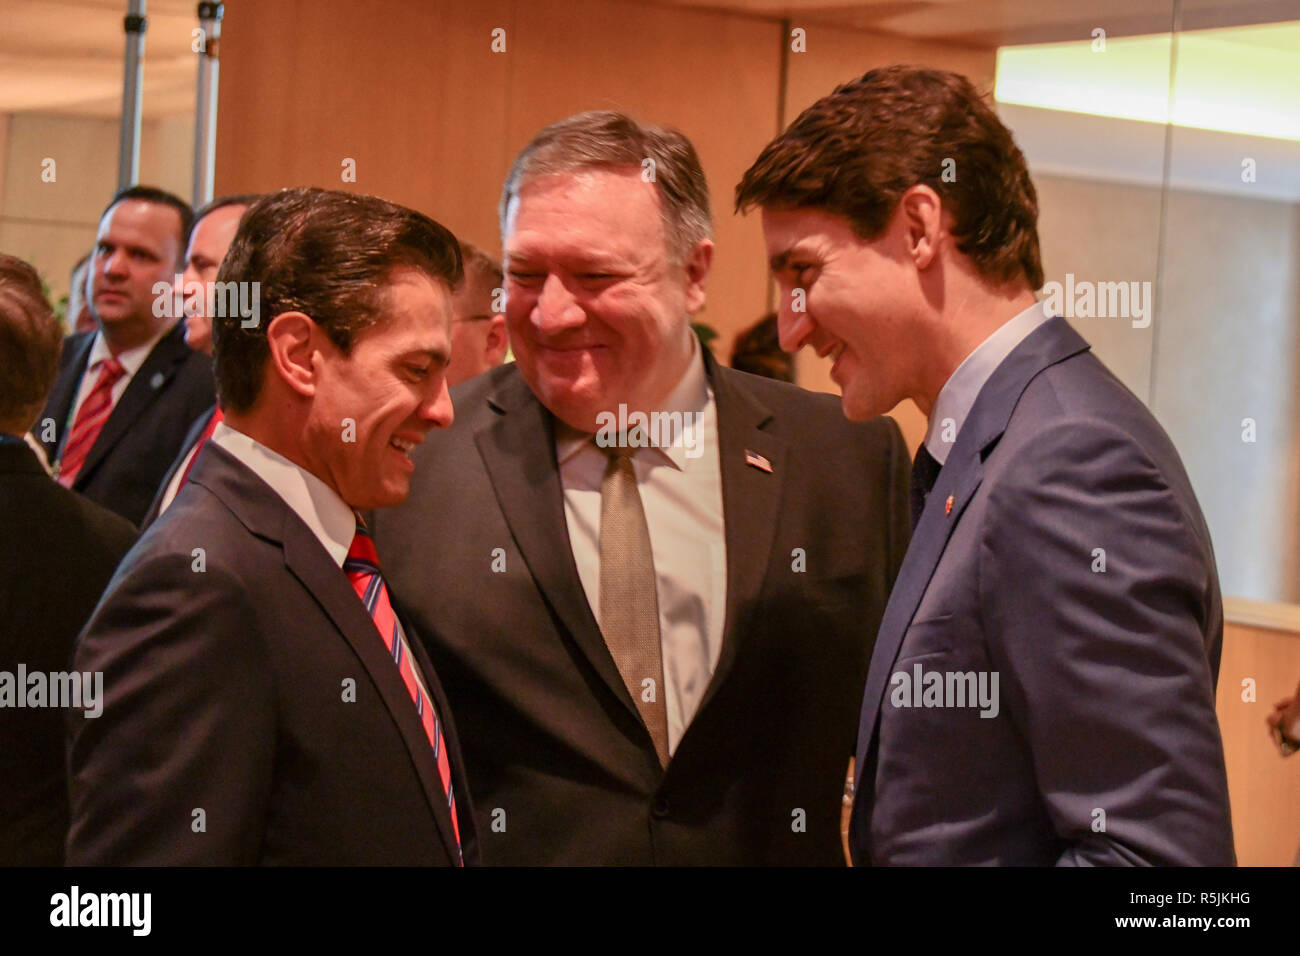 Buenos Aires, Argentina. 30th November, 2018. U.S. Secretary of State Mike Pompeo, center, chats with Mexican President Enrique Pena Nieto, left, and Canadian Prime Minister Justin Trudeau after the signing ceremony for the new NAFTA trade agreement known as USMCA November 30, 2018 in Buenos Aires, Argentina. Credit: Planetpix/Alamy Live News Stock Photo